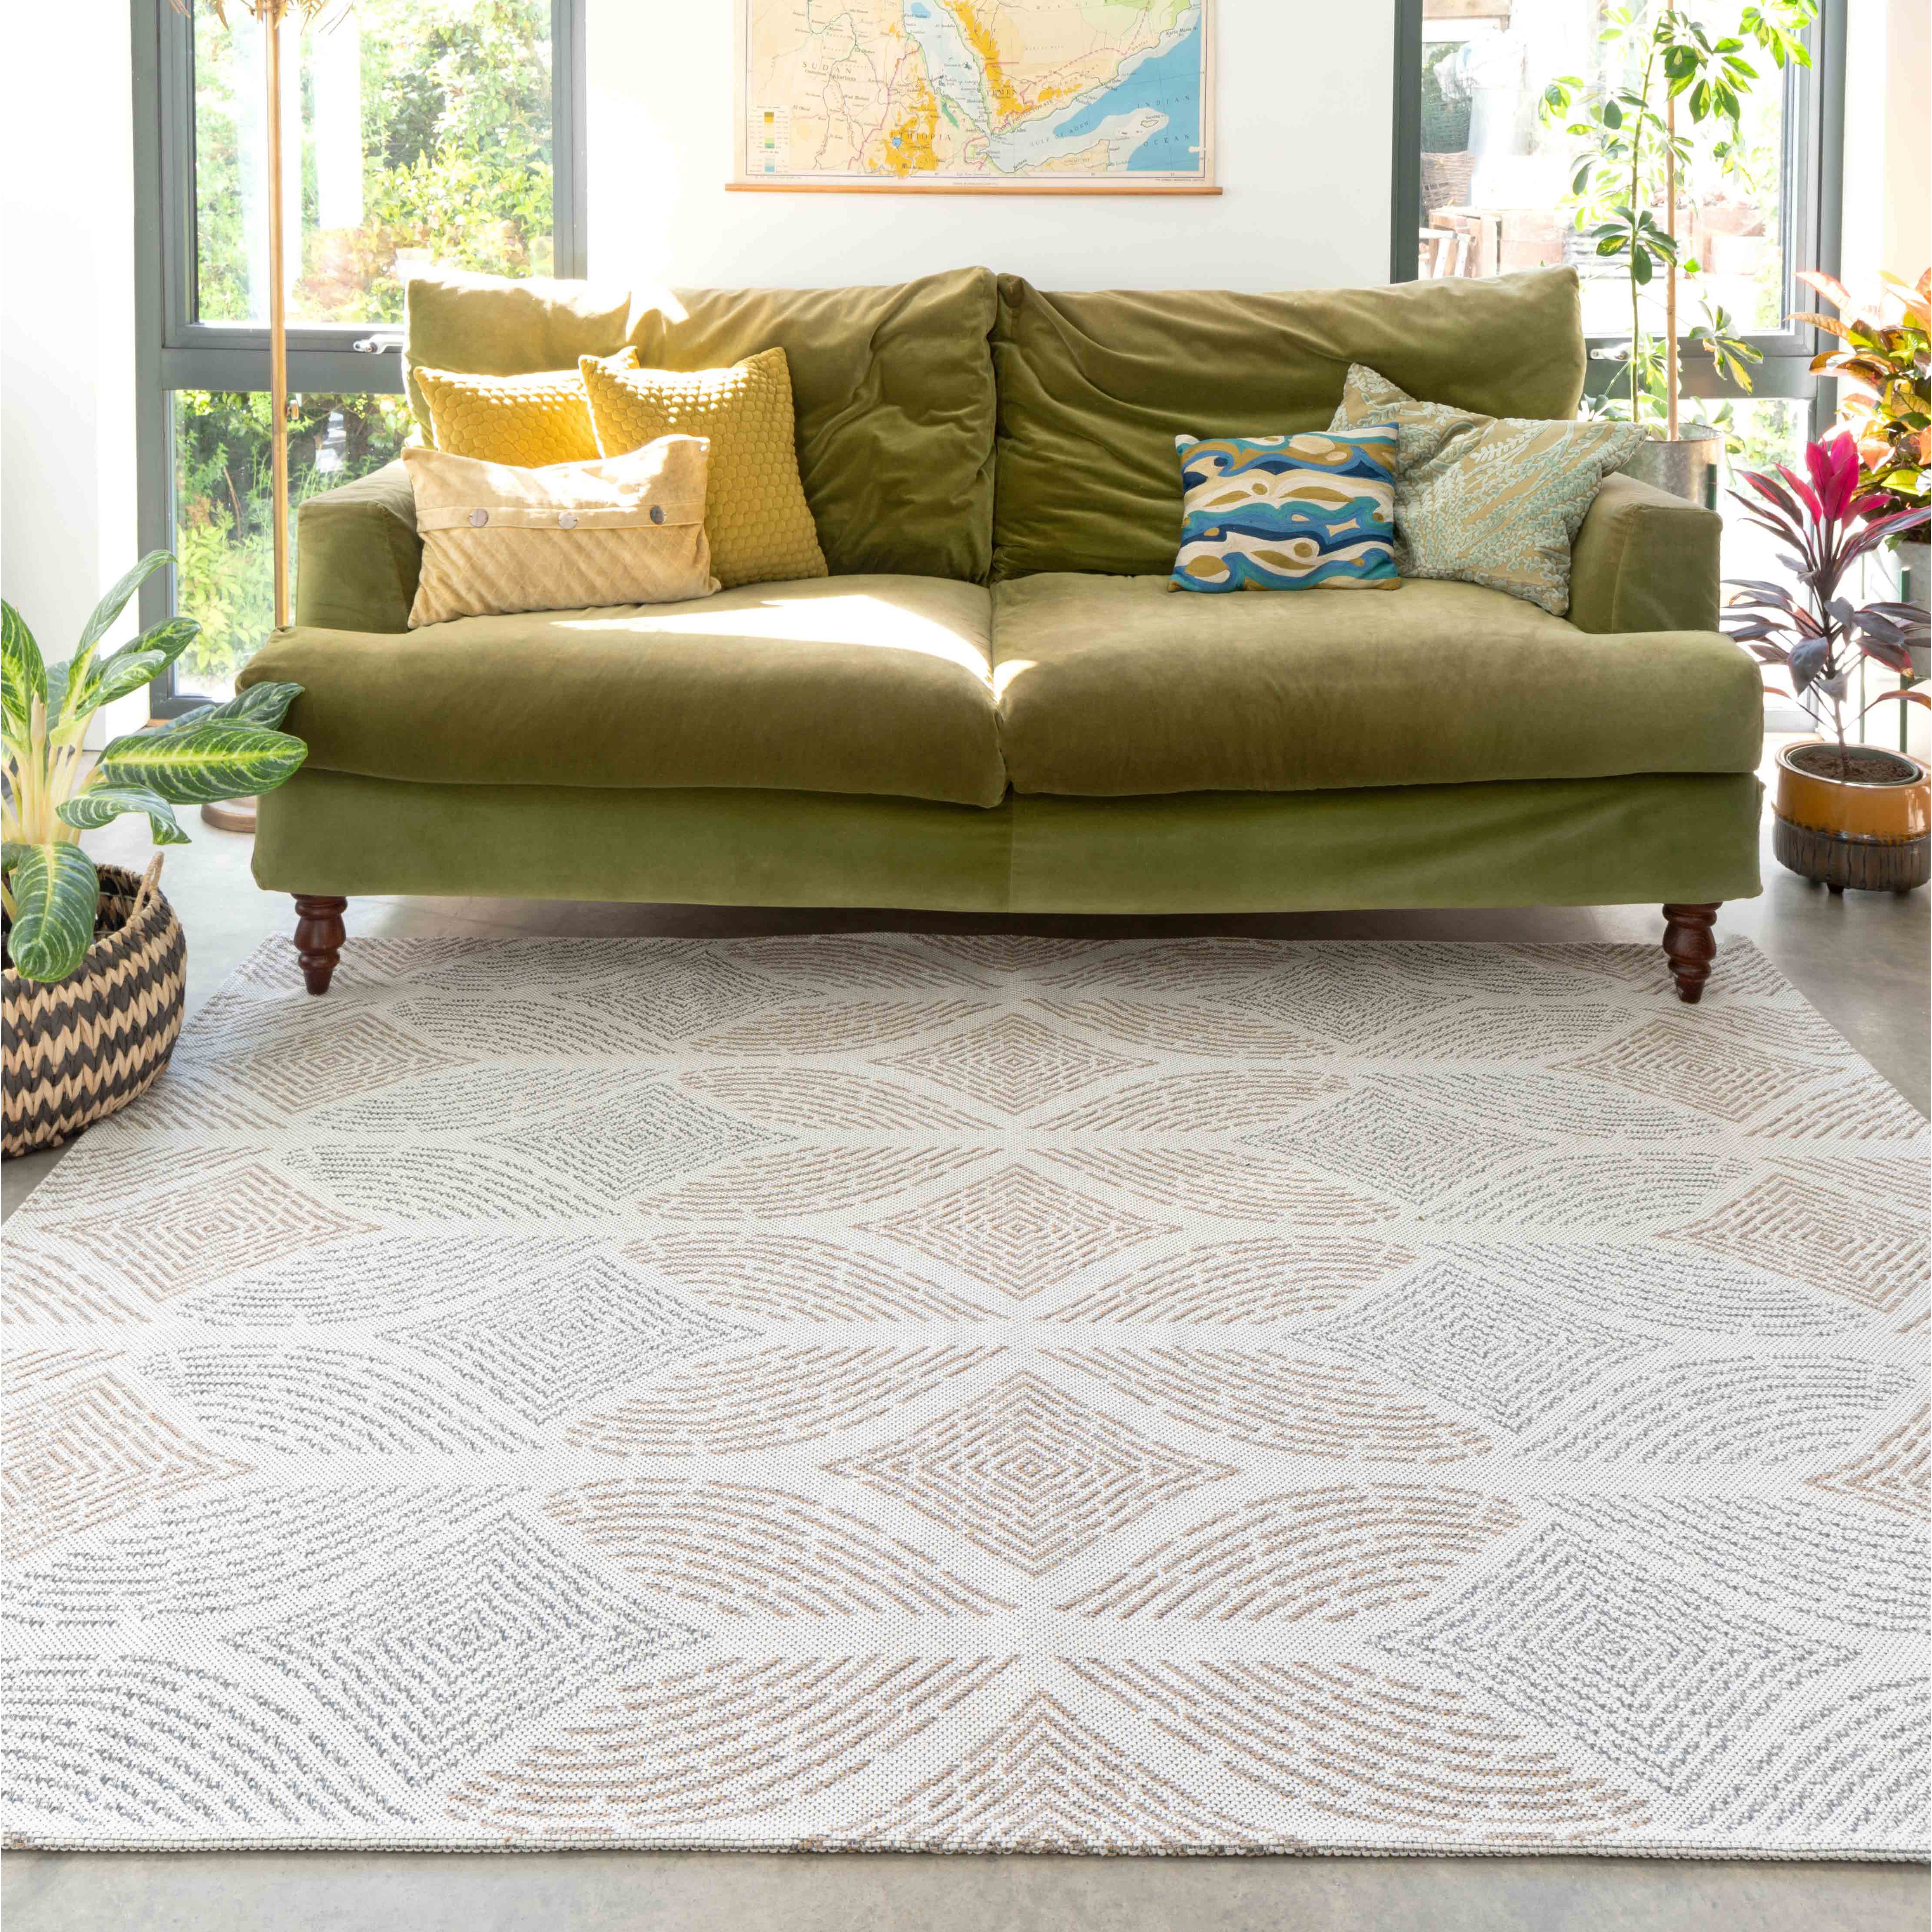 Moroccan Tile Faded Beige Woven Sustainable Recycled Cotton Rug - Kendall - 55cm x 110cm